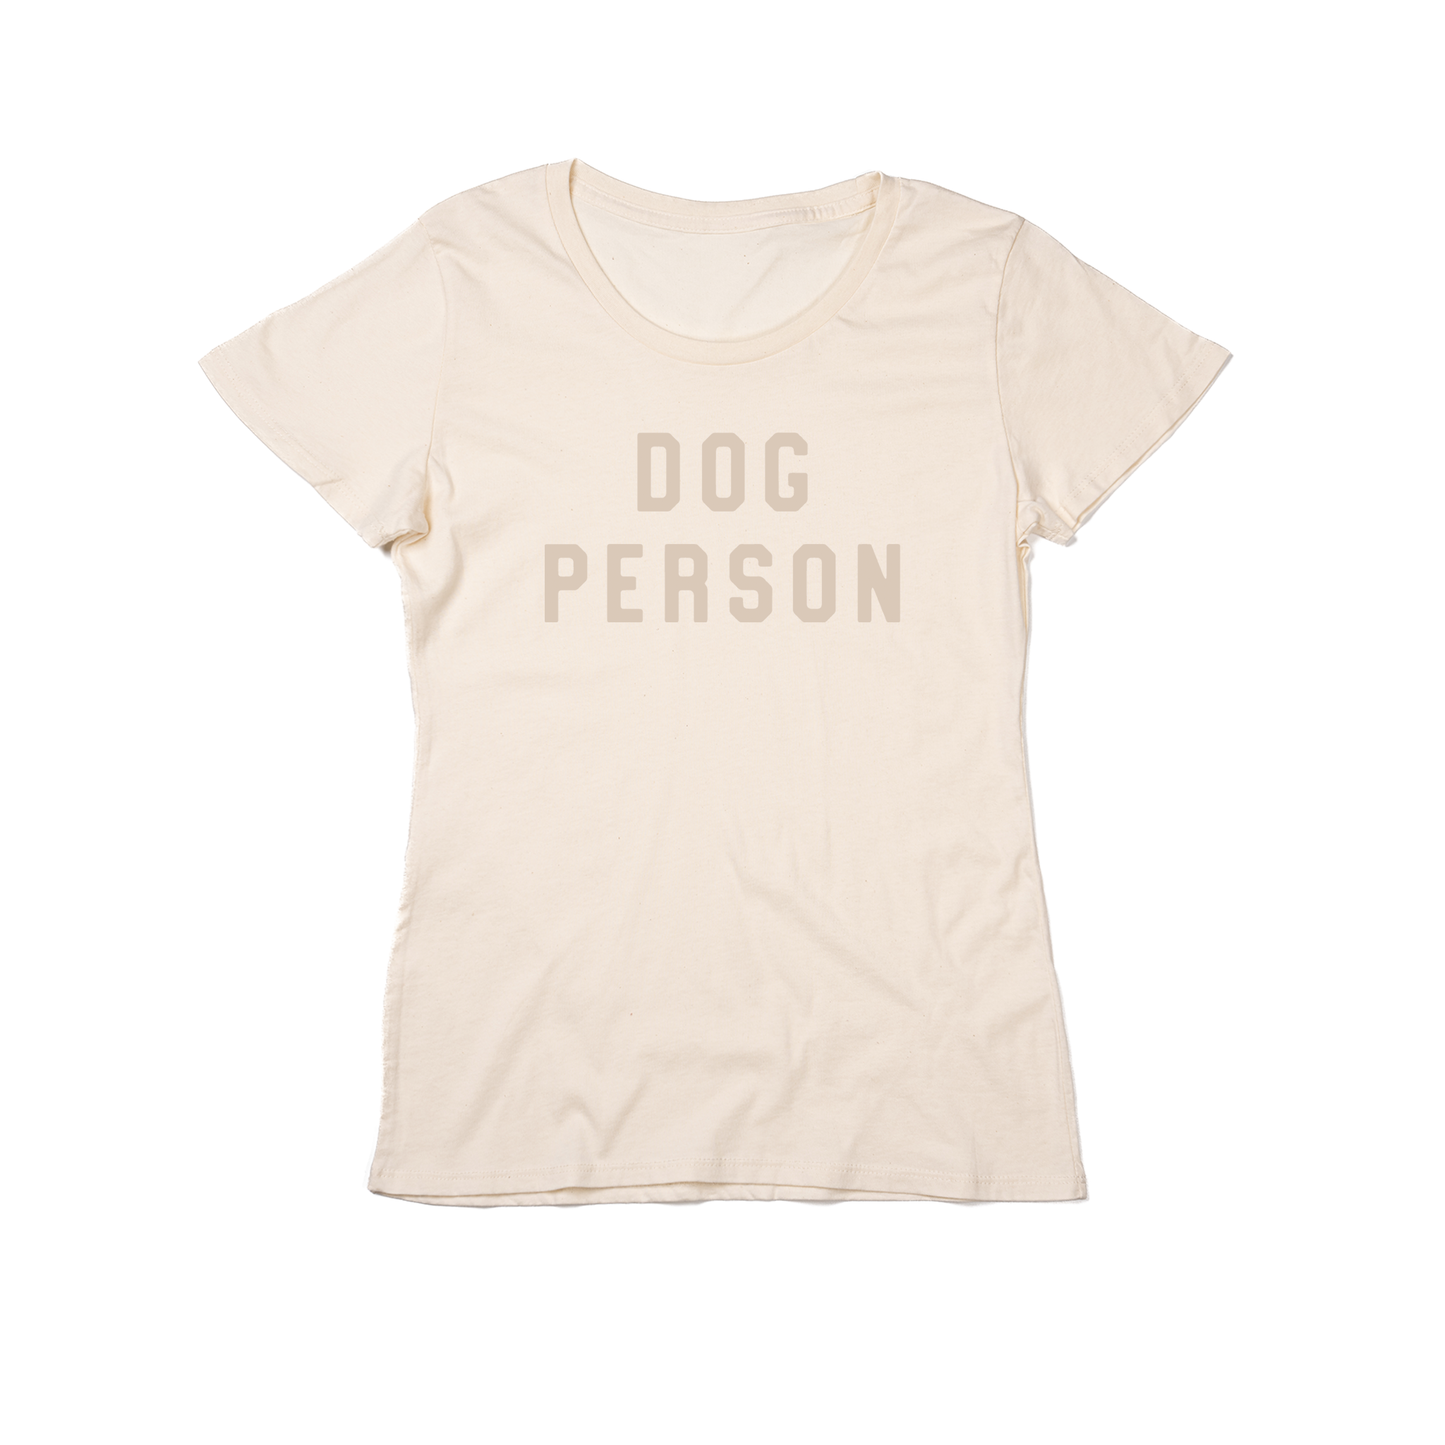 Dog Person (Stone) - Women's Fitted Tee (Natural)